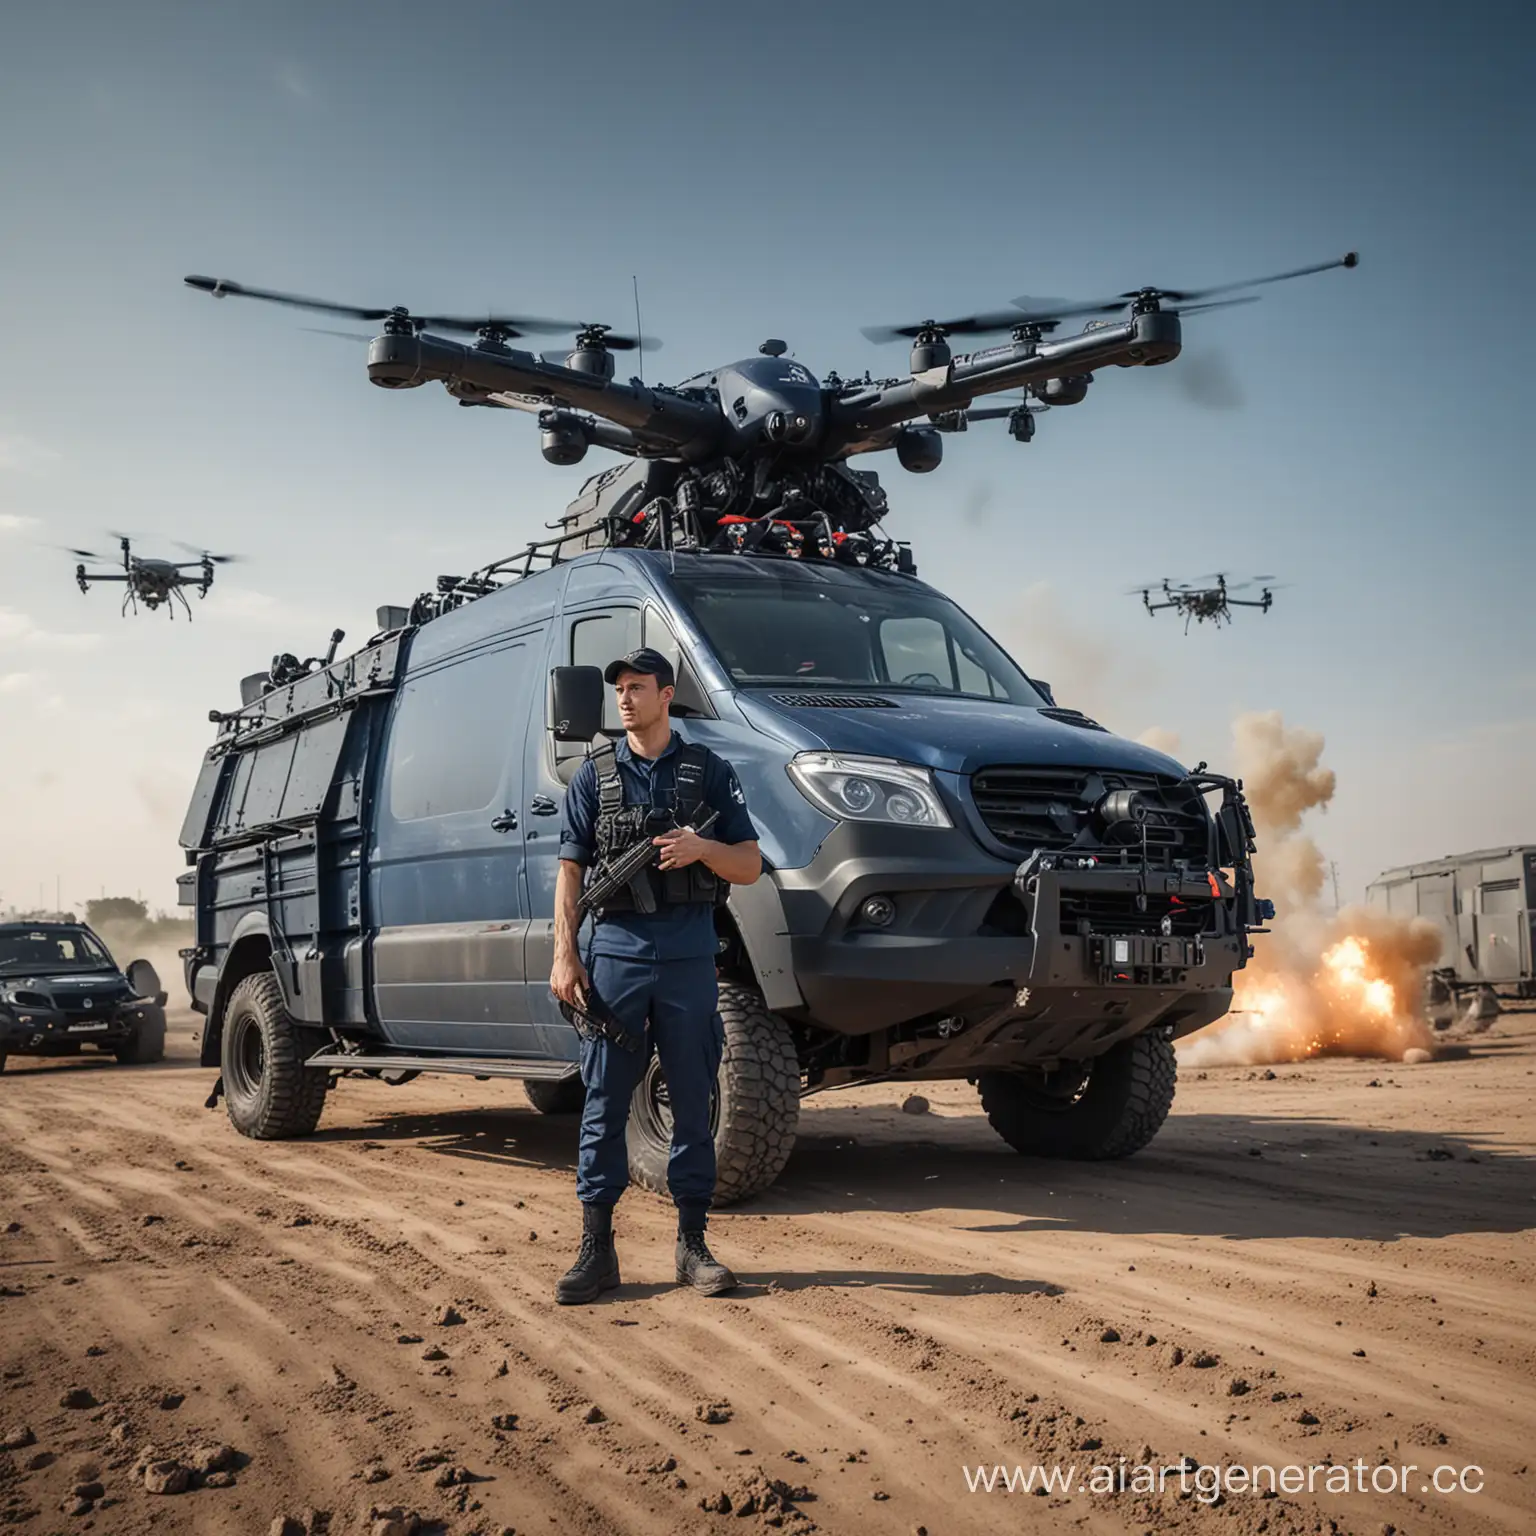 a man in military uniform, a man holding a large blaster, behind the man car mersedes sprinter dark blue color, the car has antennas, in the background fly quadrocopters and explode